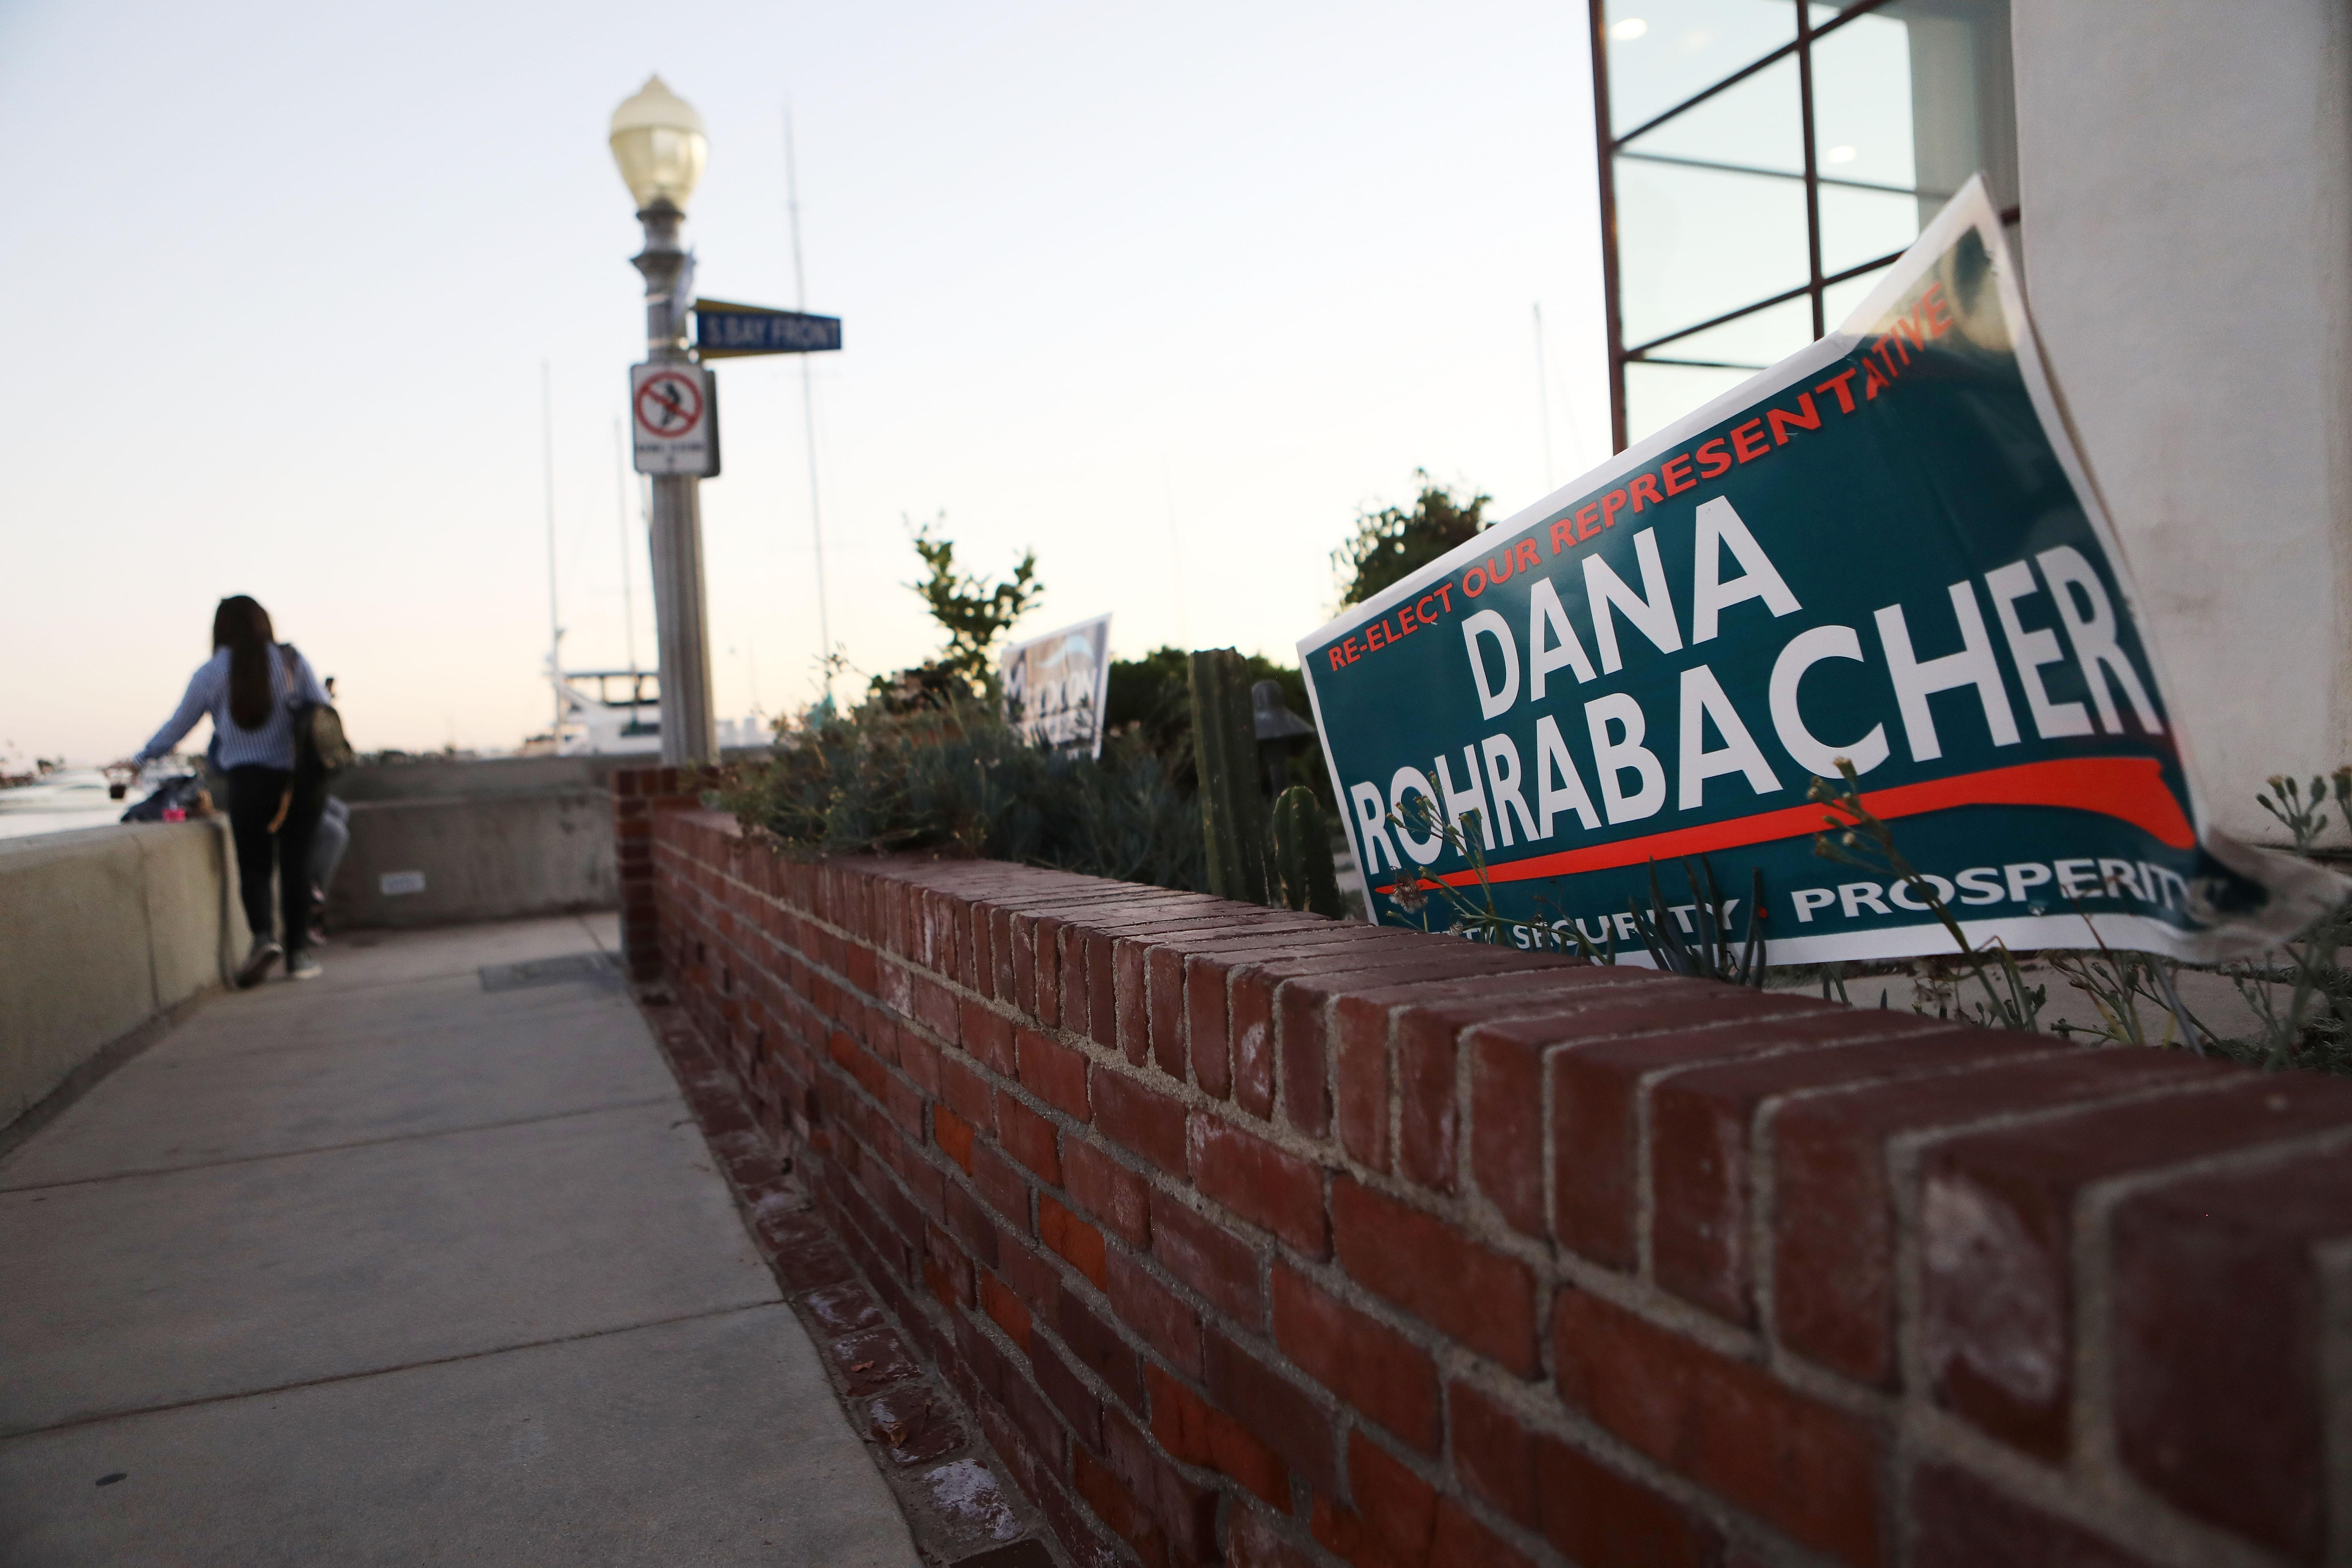 A Dana Rohrabacher campaign sign is posted in front of a home.